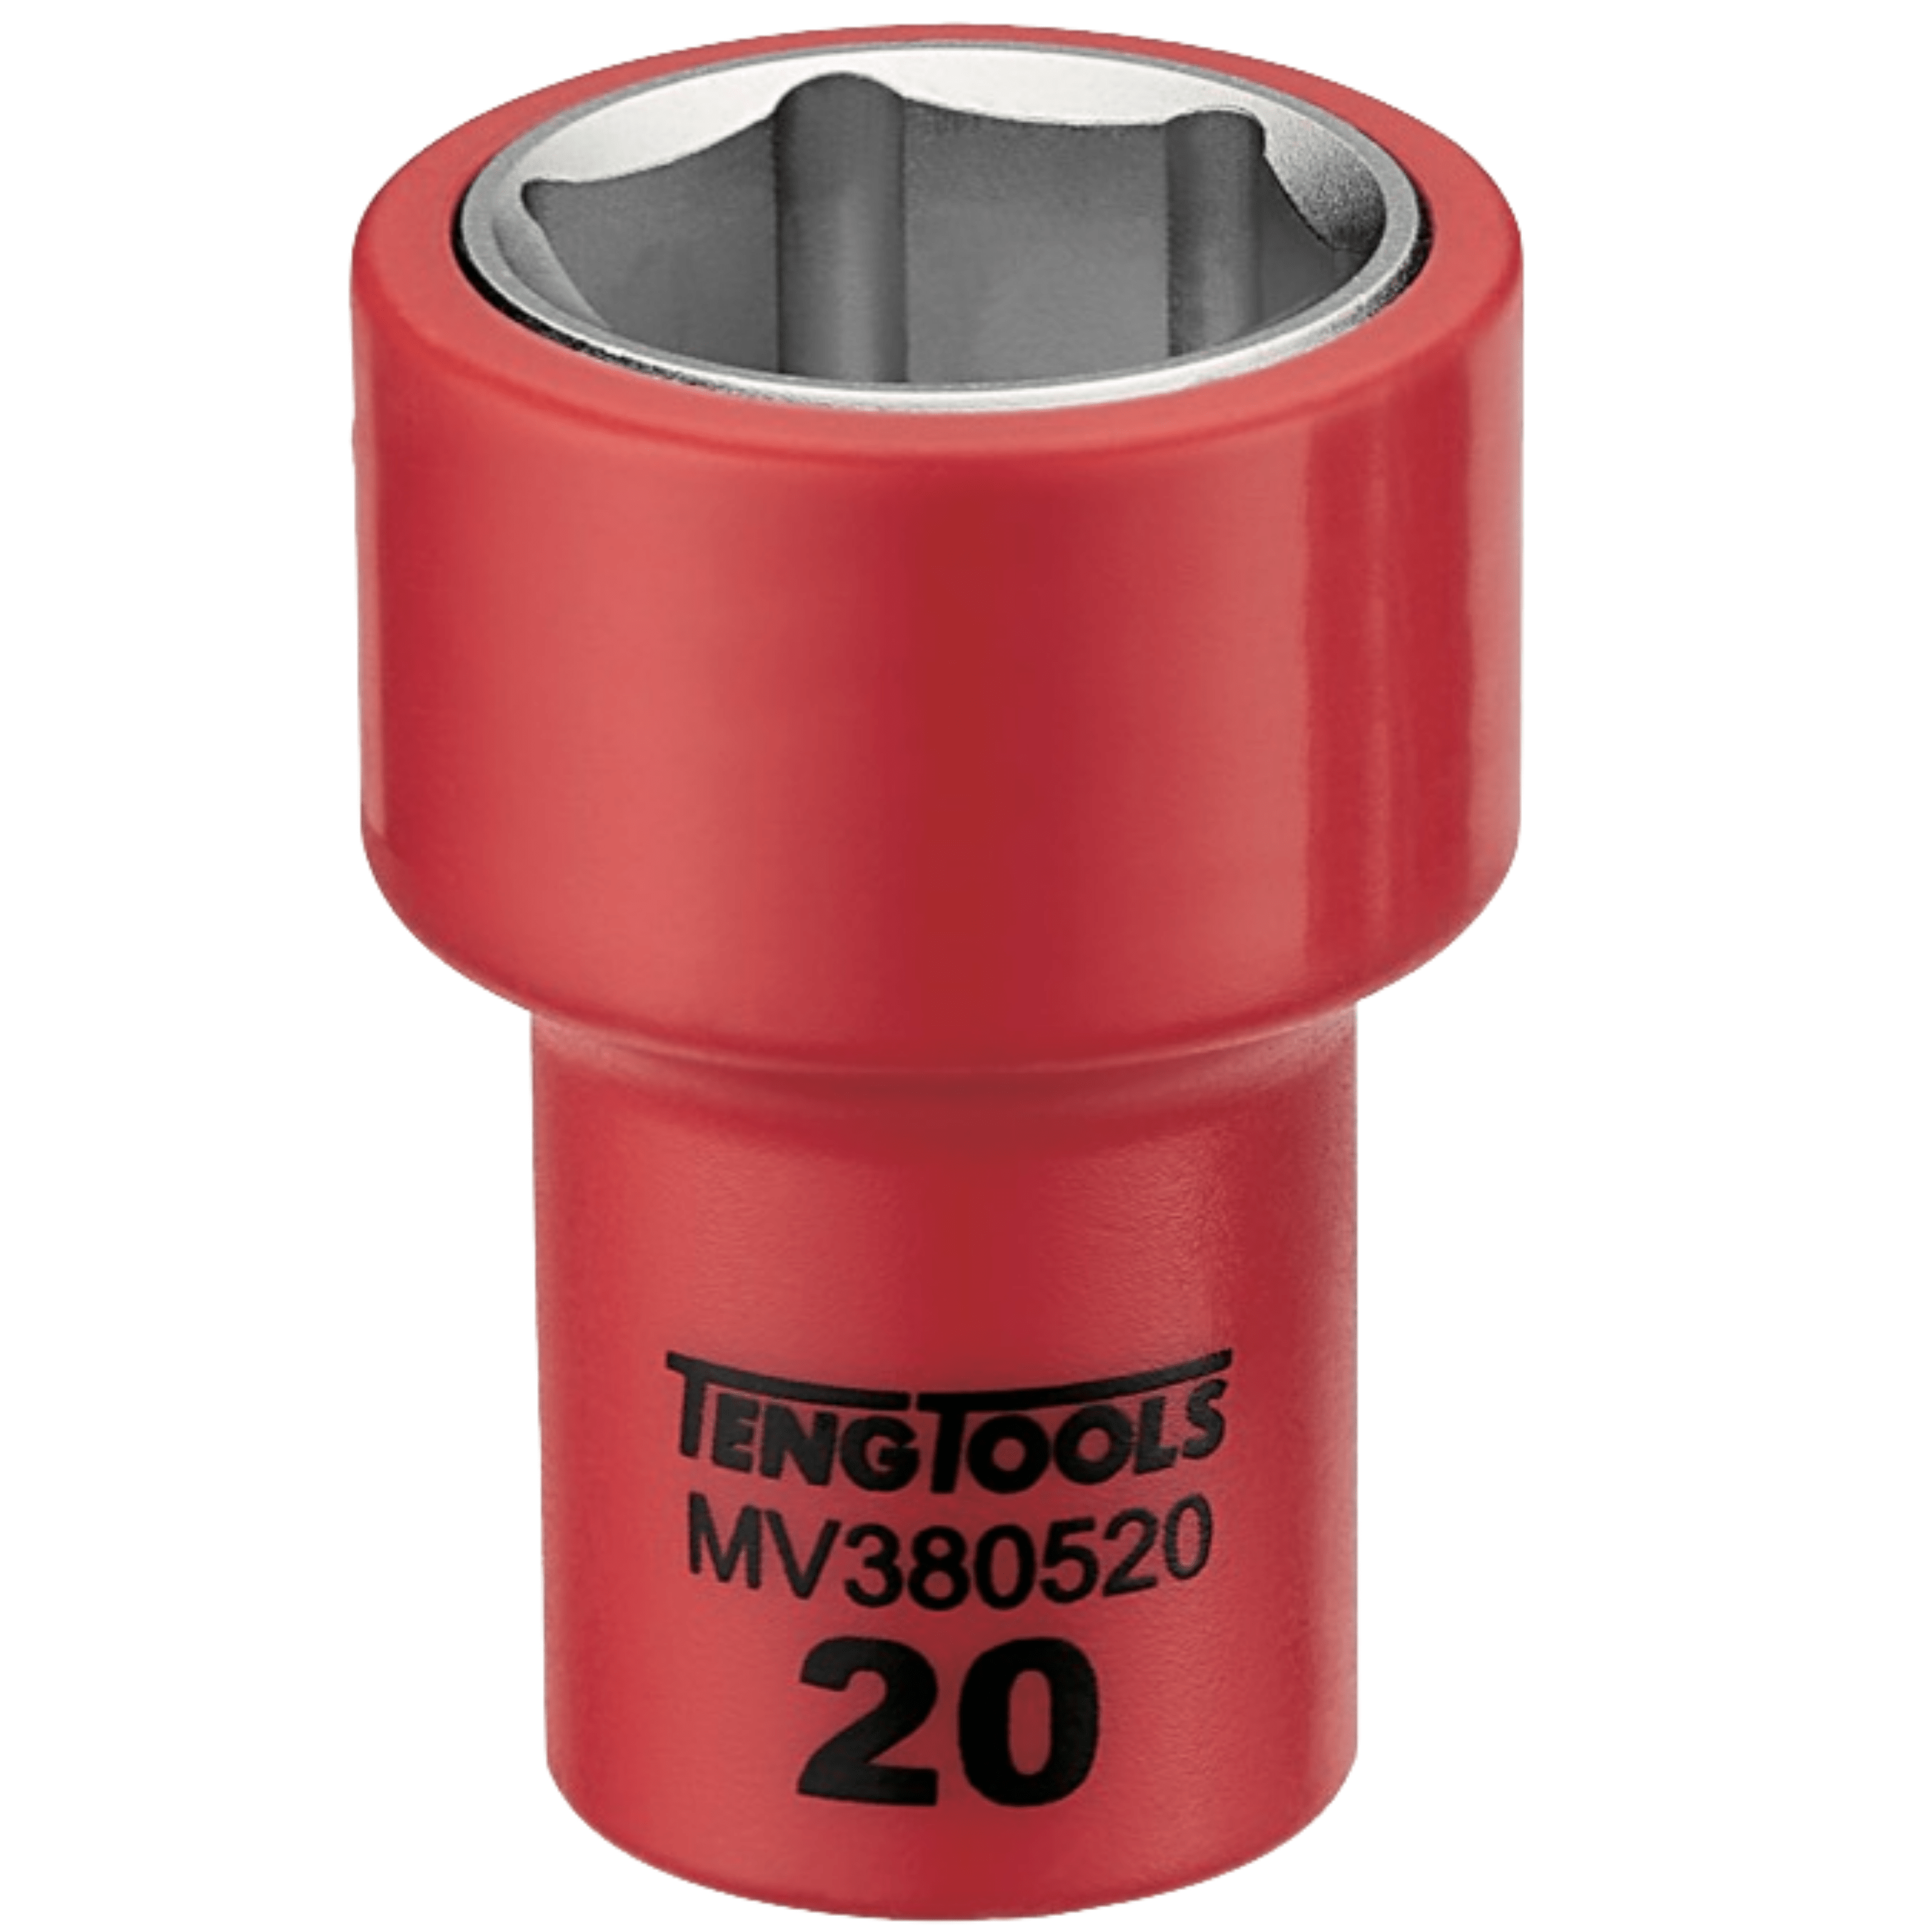 Teng Tools 3/8 Inch Drive Metric 6 Point 1000 Volt Shallow Insulated Sockets - 8mm